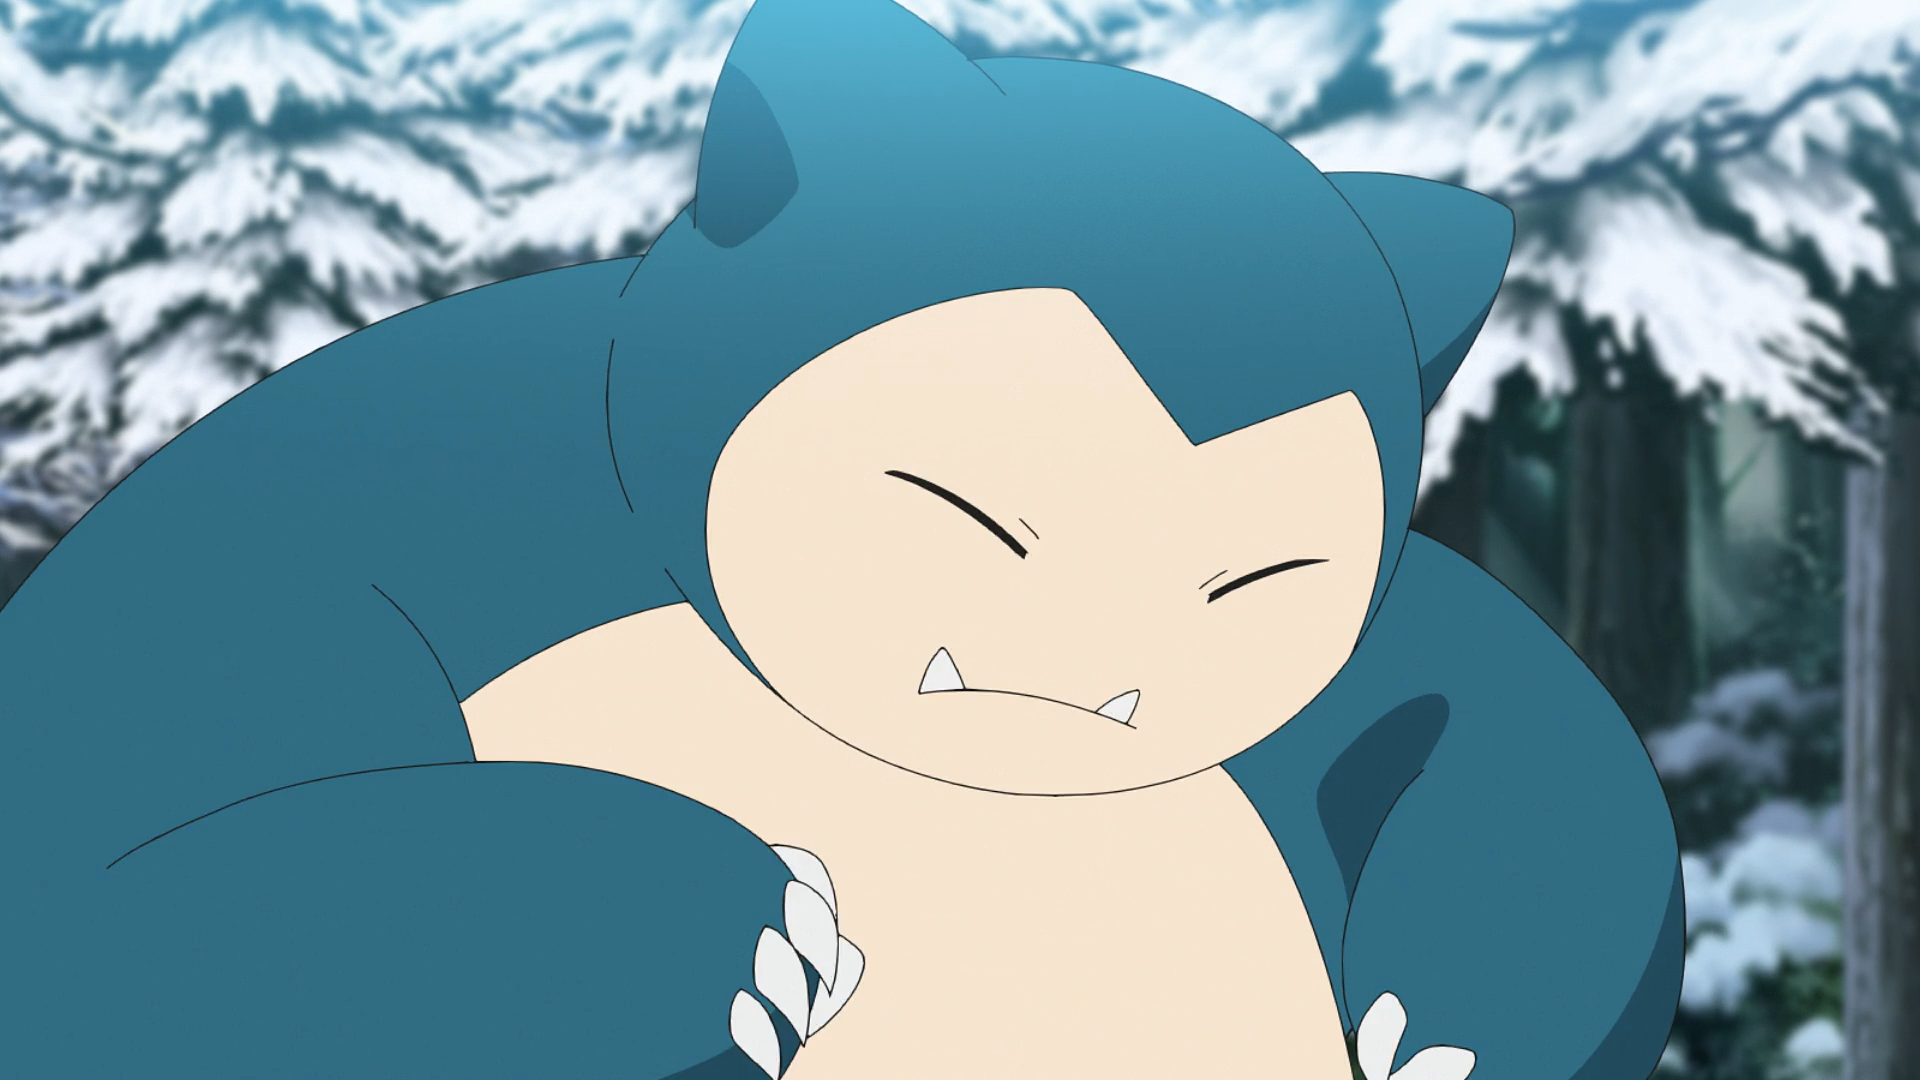 http://img4.wikia.nocookie.net/__cb20100725071226/pokemon/images/1/1e/Ash_Snorlax.png